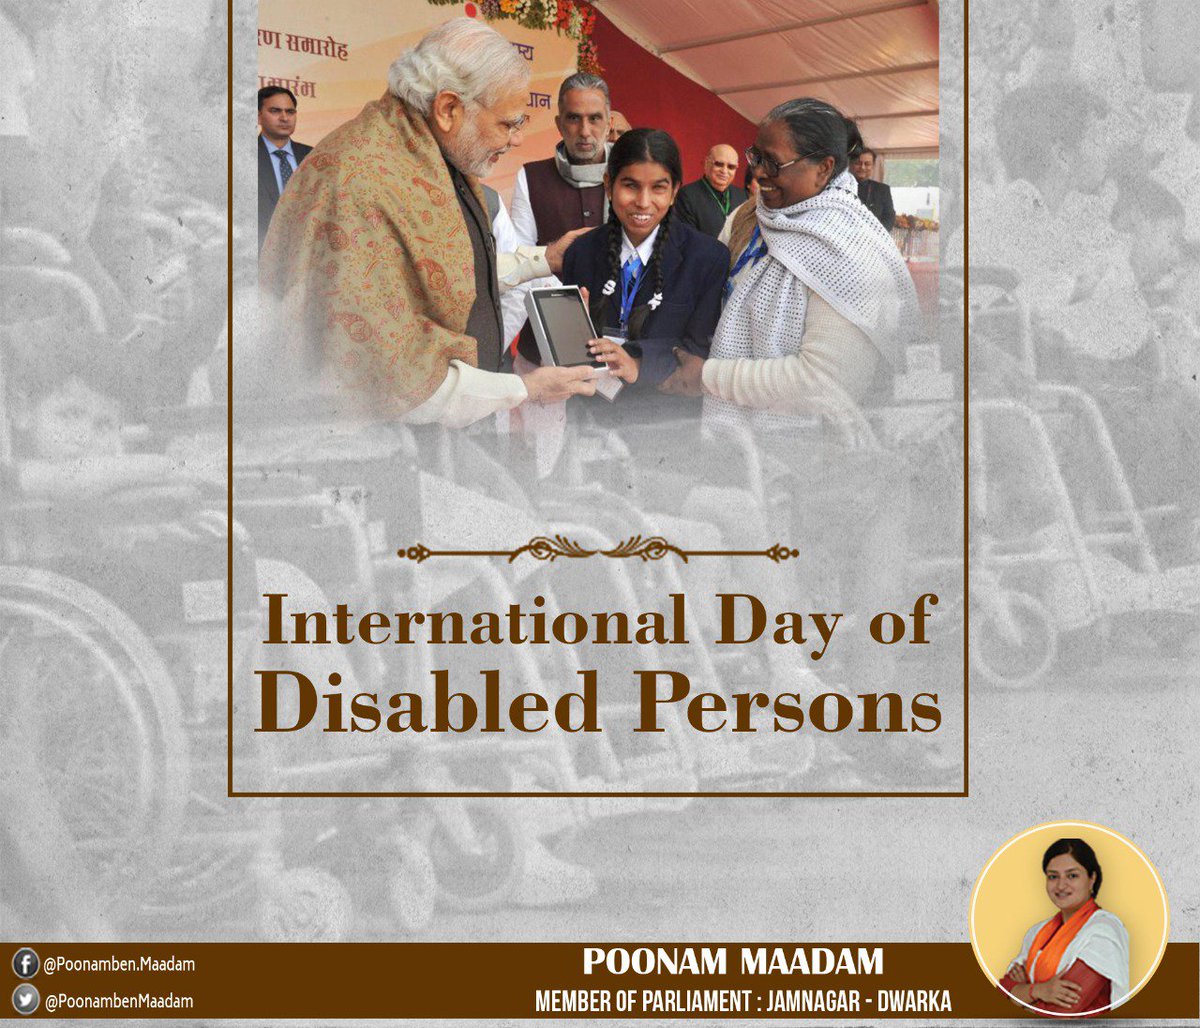 Govt. has brought in the AccessibleIndia Campaign for promoting empowerment, and to create real opportunities for differently abled people.On this #InternationalDayofPeoplewithDisability, let us pledge to join hands together for 'Inclusive India' where everyone is treated equally